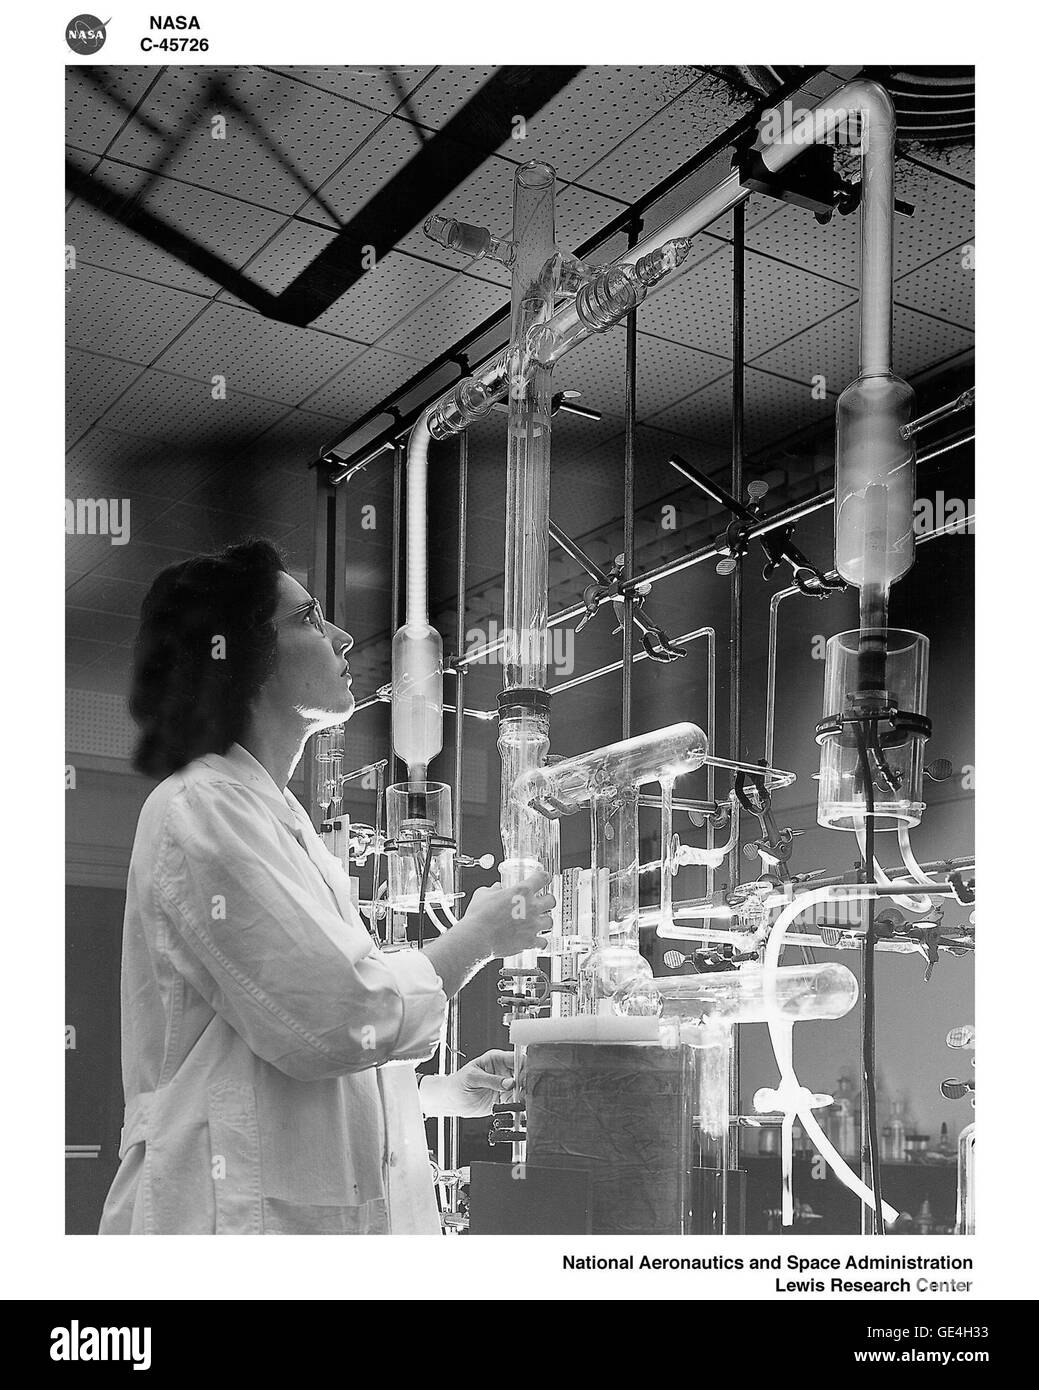 (August 14, 1957) One of the rare women physicists at NASA Lewis Research Center, working on an atomic laboratory experiment that pushed a gas at low pressure through a high-voltage discharge  Image # : C-1957-45726 Stock Photo